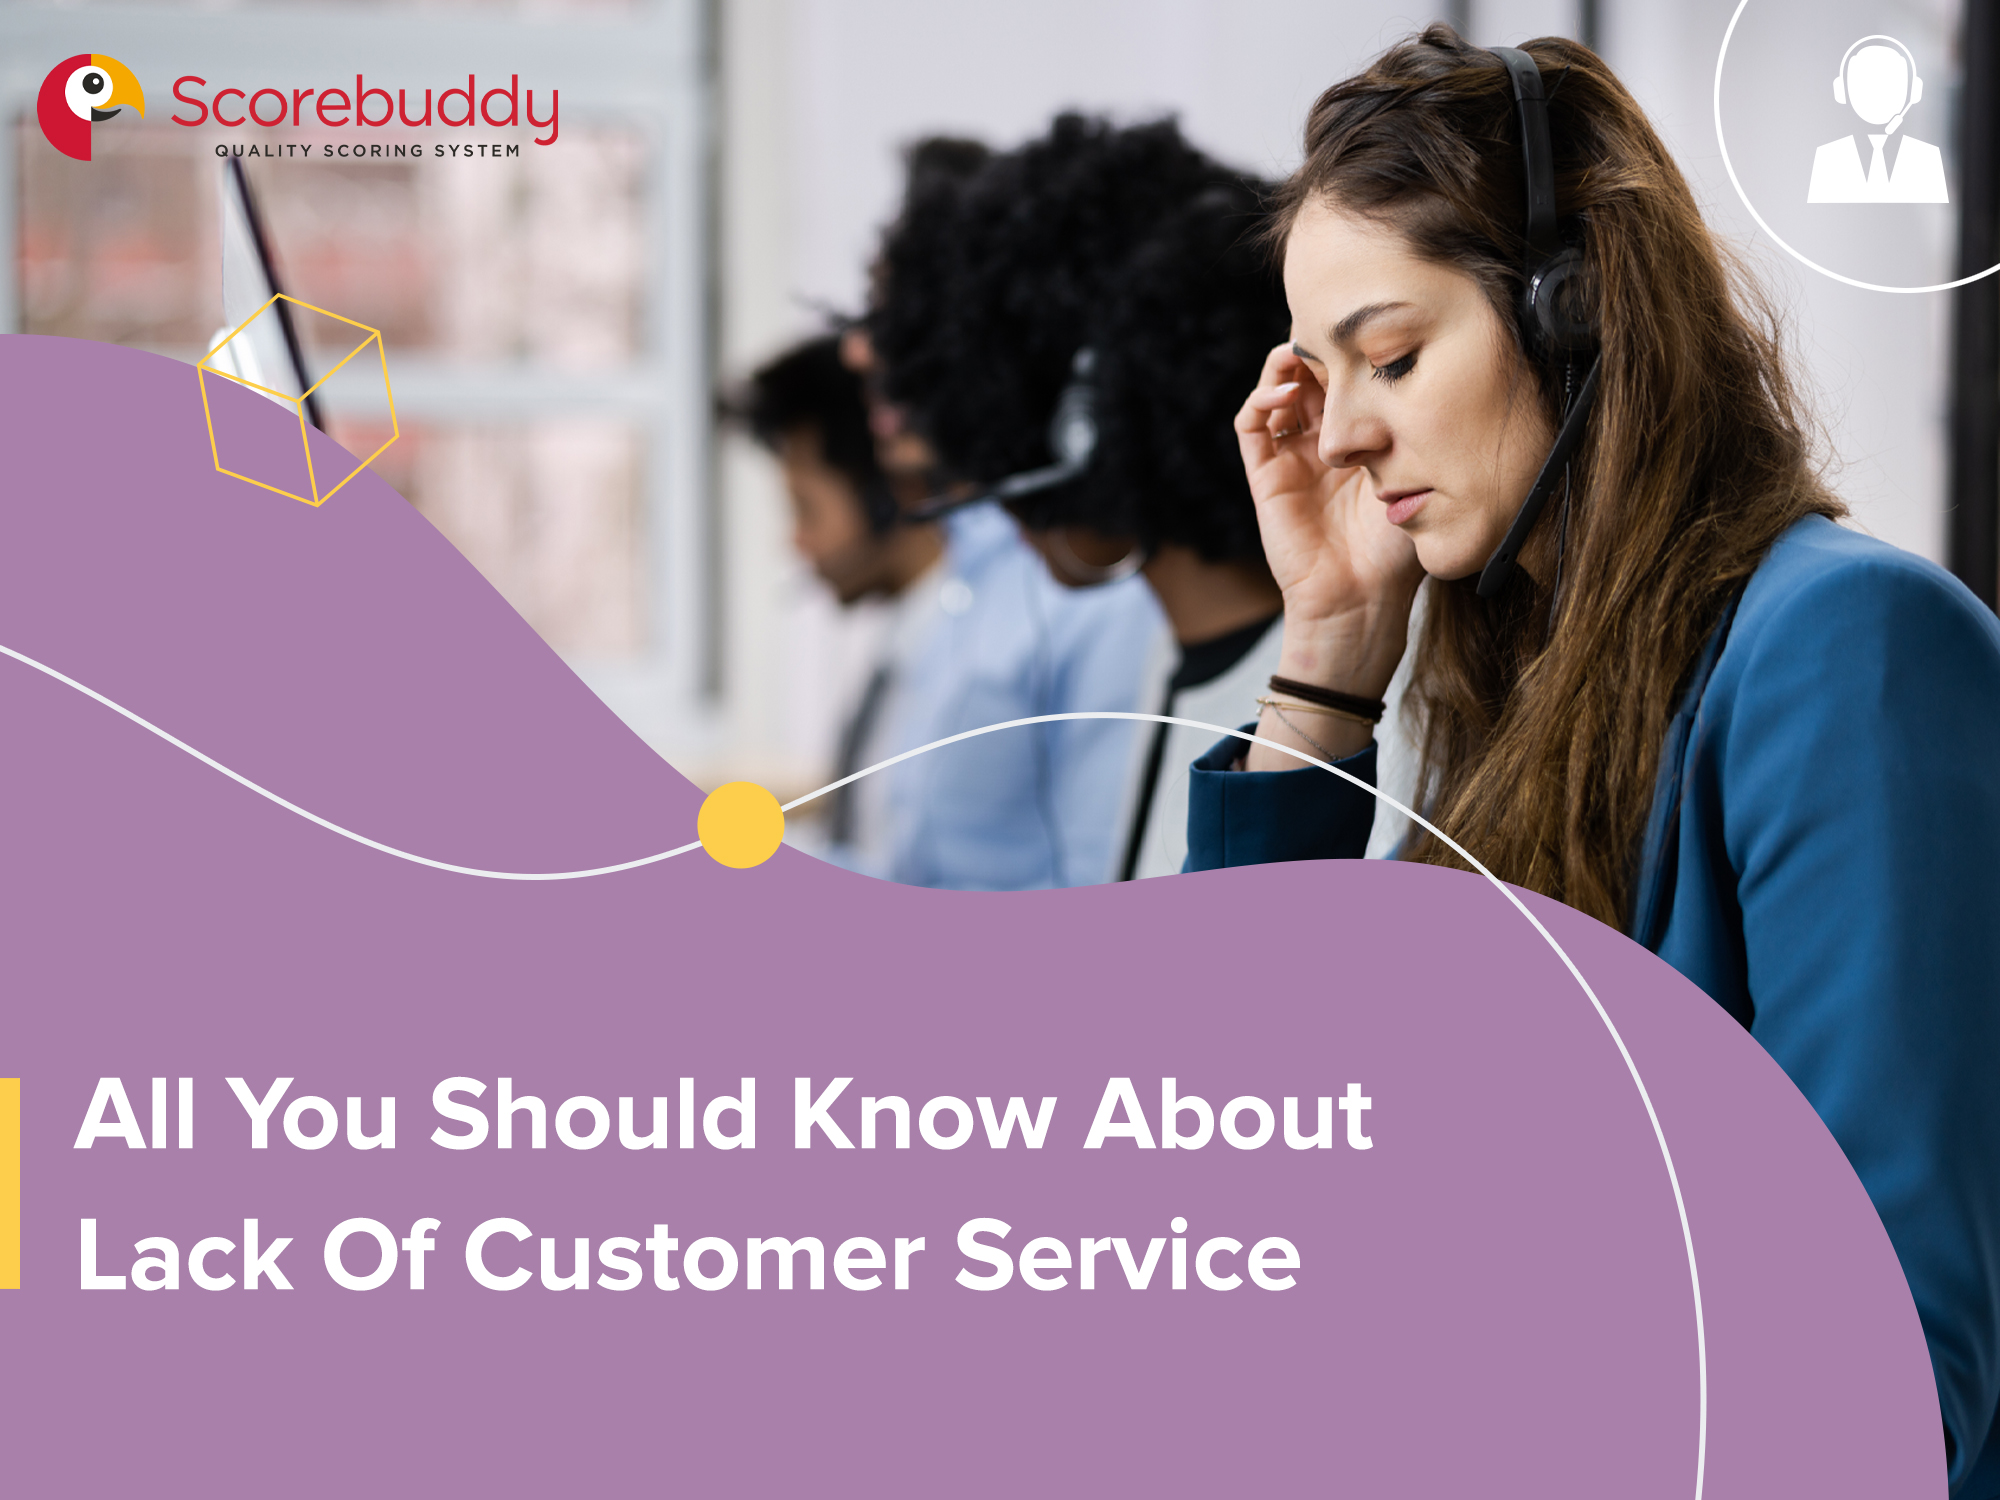 All You Should Know About Lack of Customer Service